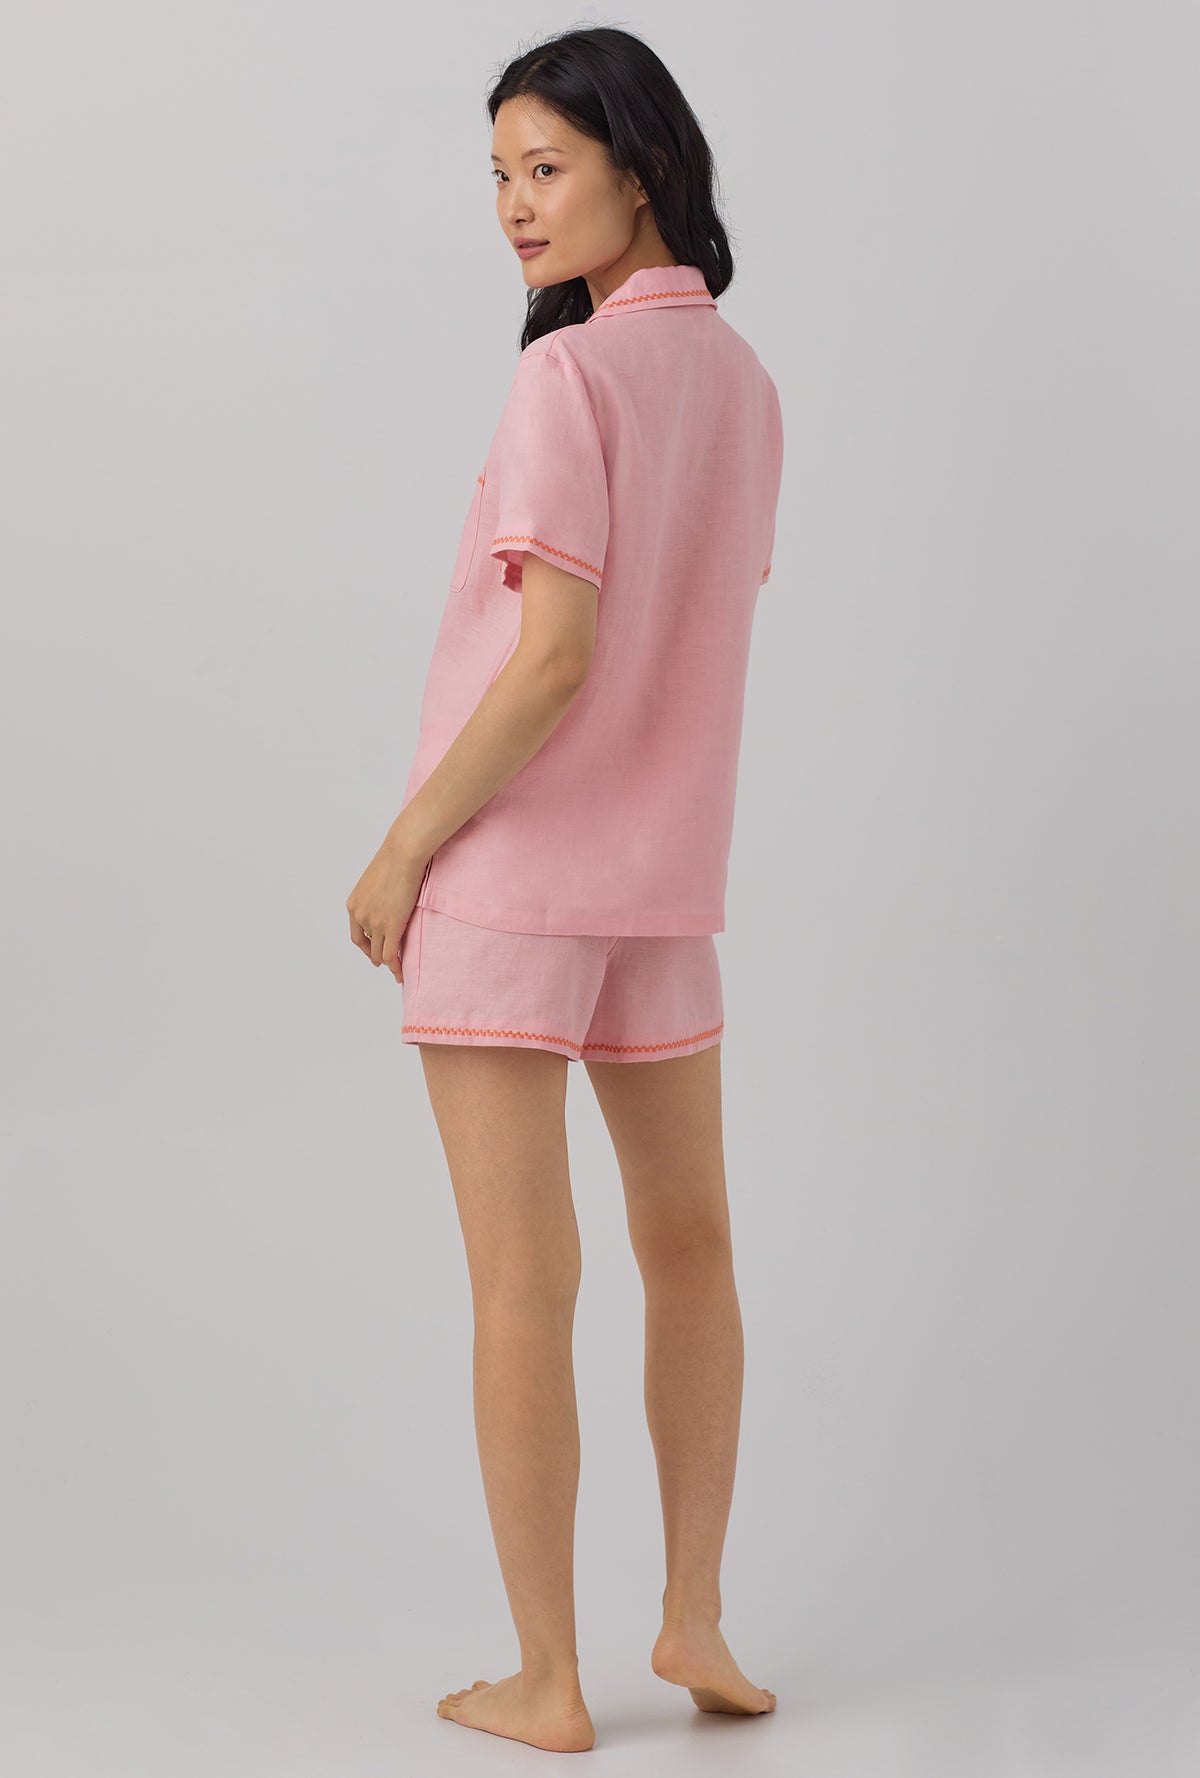 A lady wearing pink Short Sleeve Classic Shorty Woven Linen PJ Set with Orchid Pink print.